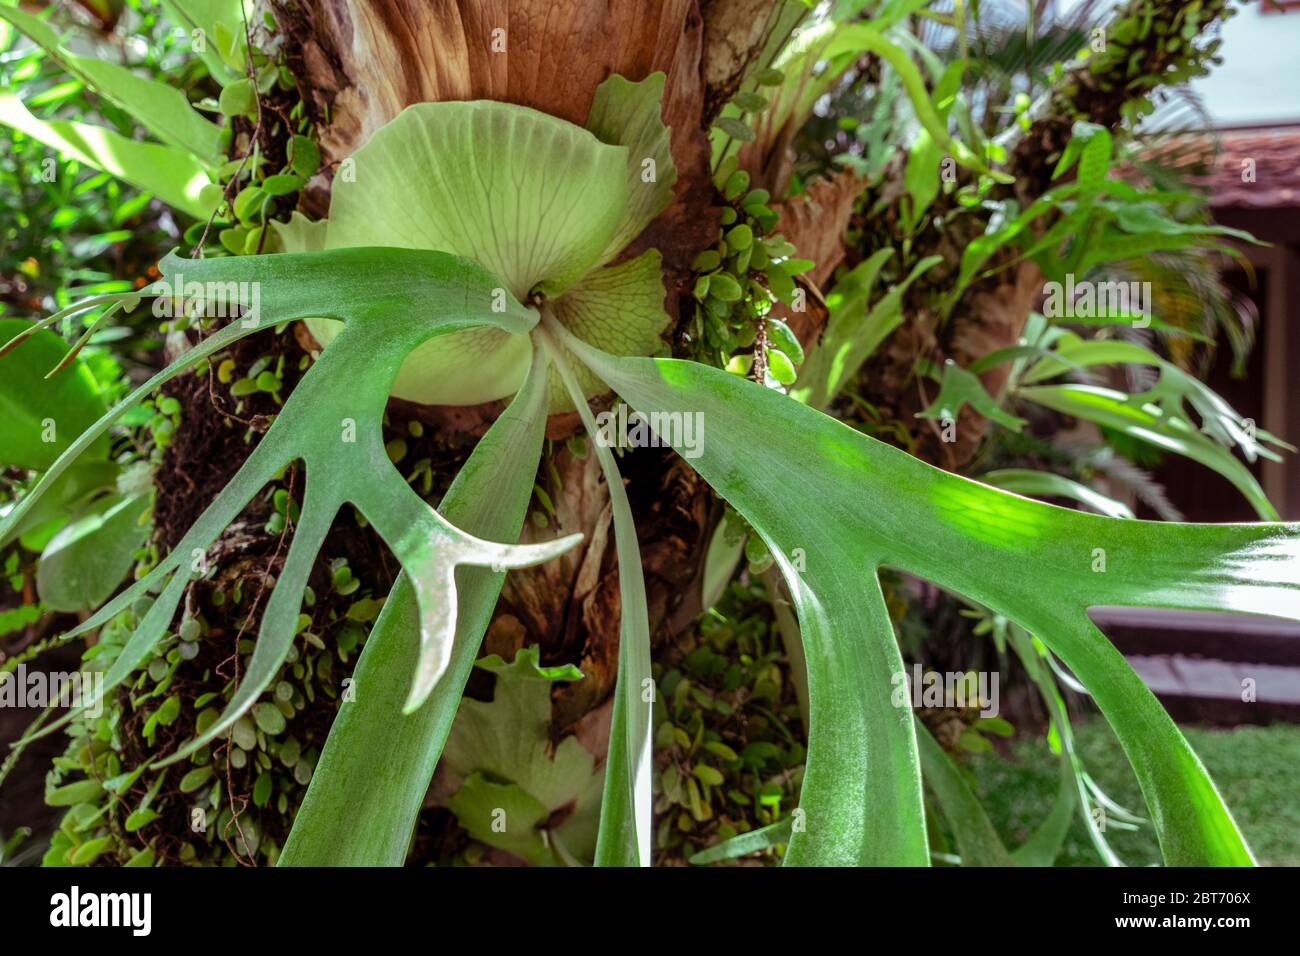 Close up of a staghorn fern, Platycerium, tropical Elkhorn grew on the branch of tree in tropical rainforest, parasite plant on a tree in Bali, Indone Stock Photo